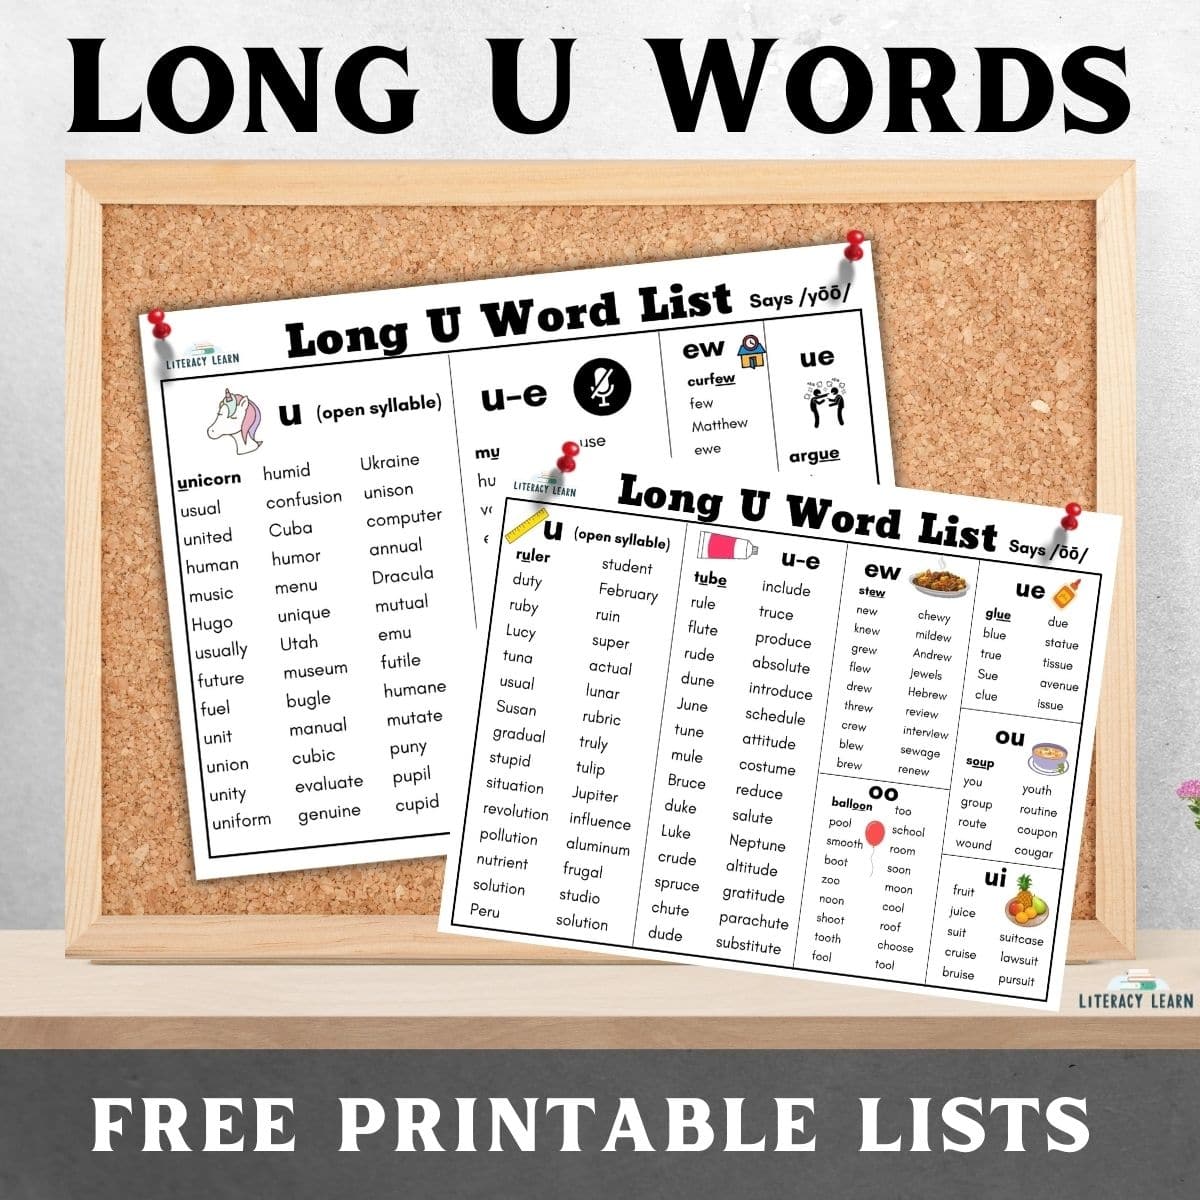 A corkboard with two Long U Worksheets with 213 Long U words displayed.